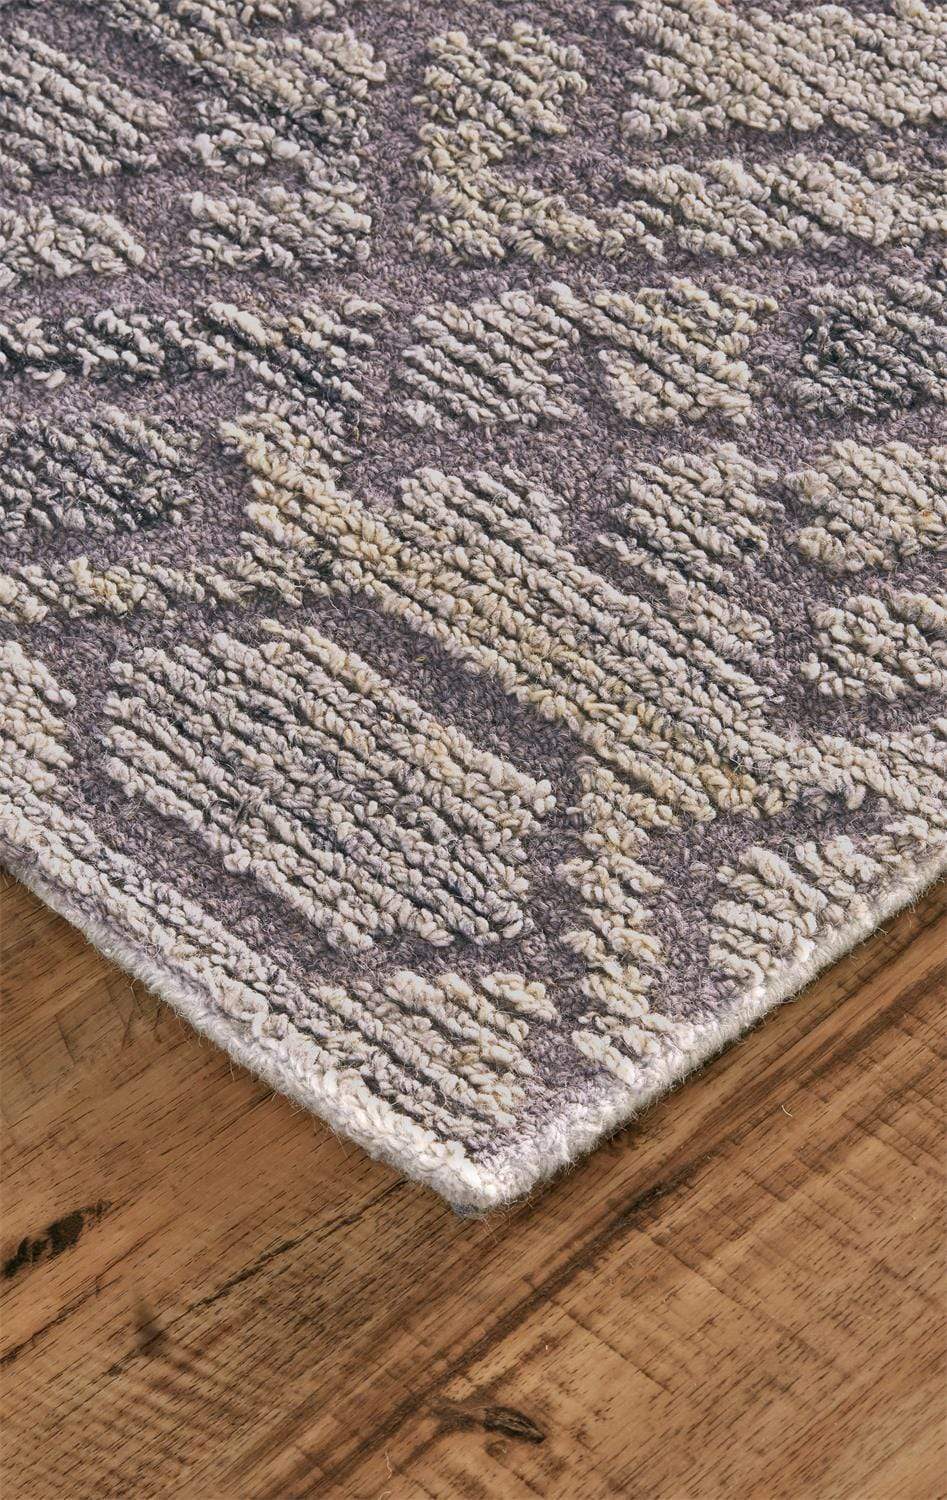 Feizy Feizy Asher Lustrous Tufted Wool Rug - Light & Dark Gray - Available in 9 Sizes